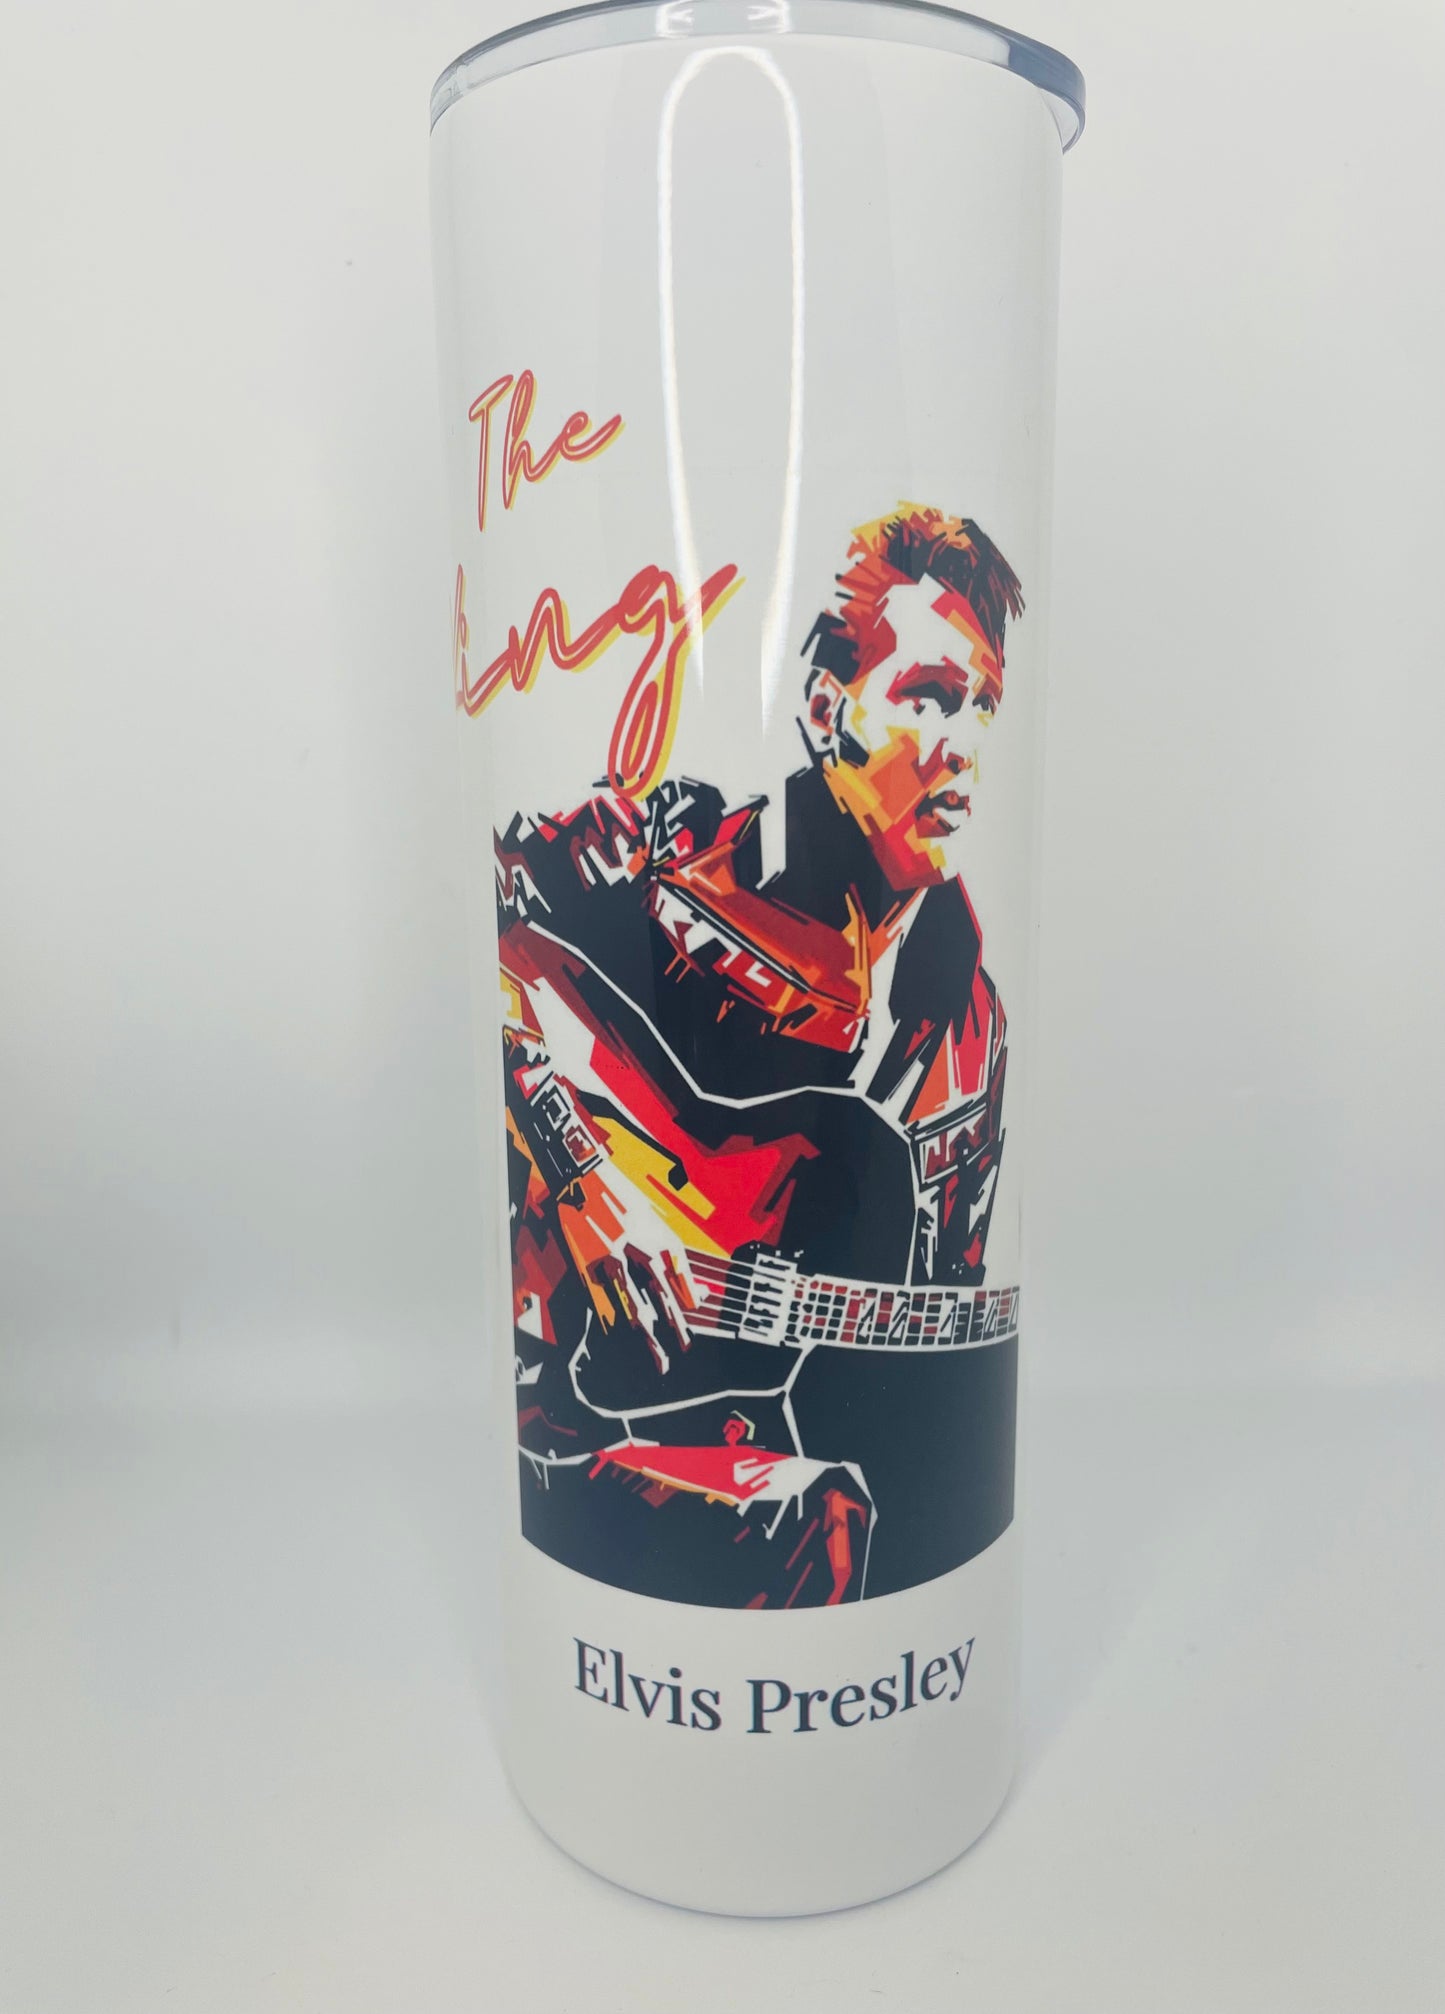 Customized Tumblers, Personalized Tumblers, Personalized Cups, Elvis, Elvis Presley, Elvis Customized Tumblers, Elvis Presley Customized Tumblers, Elvis Cup, Elvis Presley Cup, Coffee Cups, Tumblers, Unique Gifts, Personalized Gifts